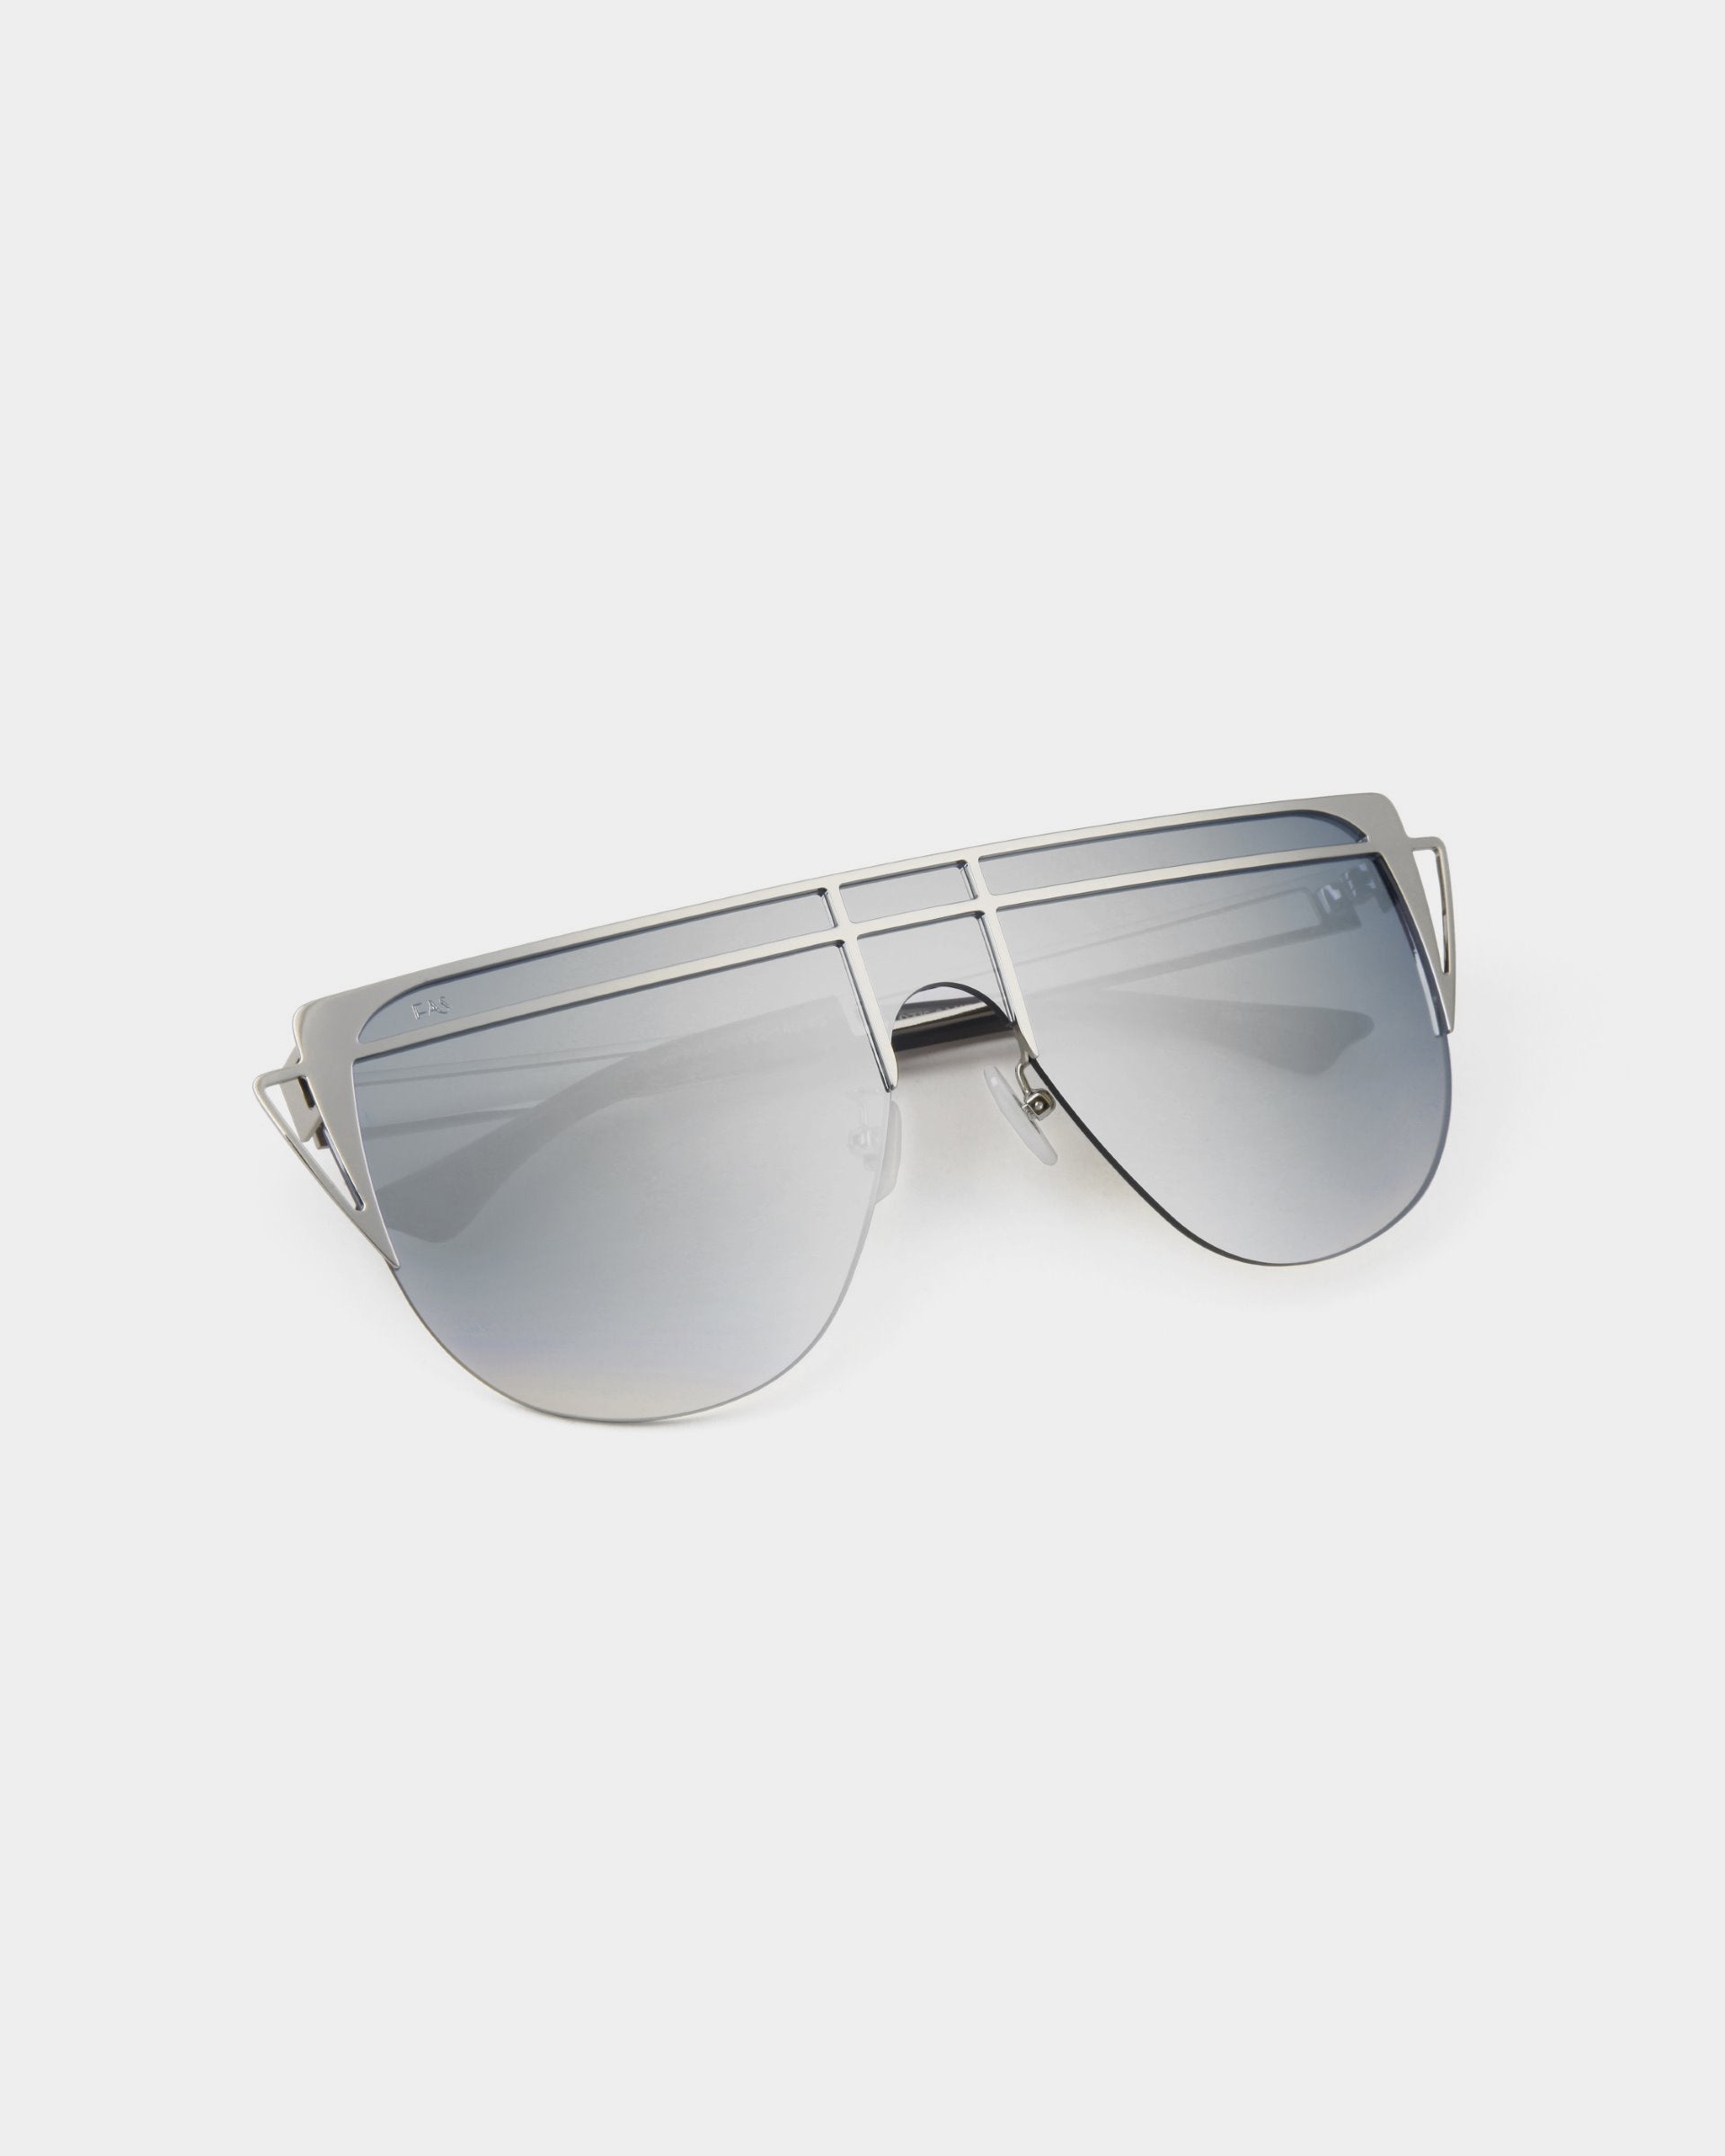 A pair of avant-garde sunglasses, Alien by For Art&#39;s Sake®, with a unique double-bridge design and gradient gray lenses, placed on a white background. The handmade gold-plated stainless steel frames are thin and metallic, giving the sunglasses a sleek and modern appearance while offering 100% UV protection.